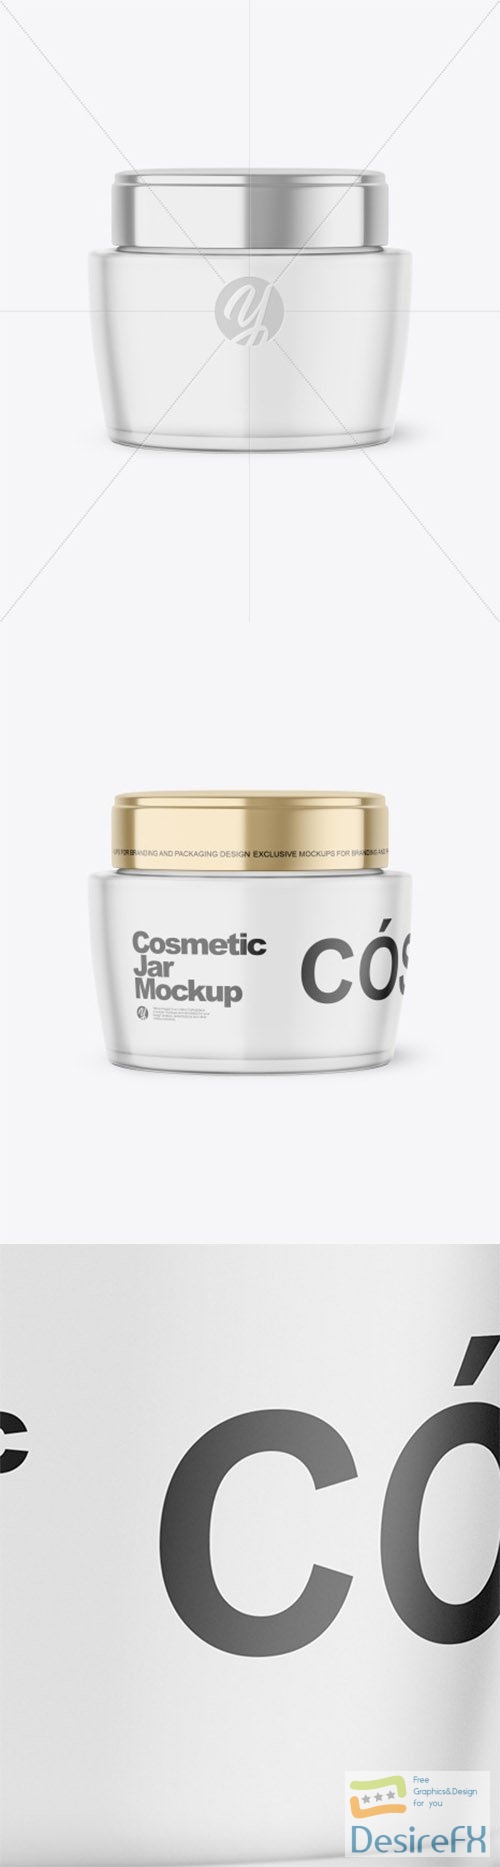 Frosted Glass Cosmetic Jar Mockup 84580 TIF